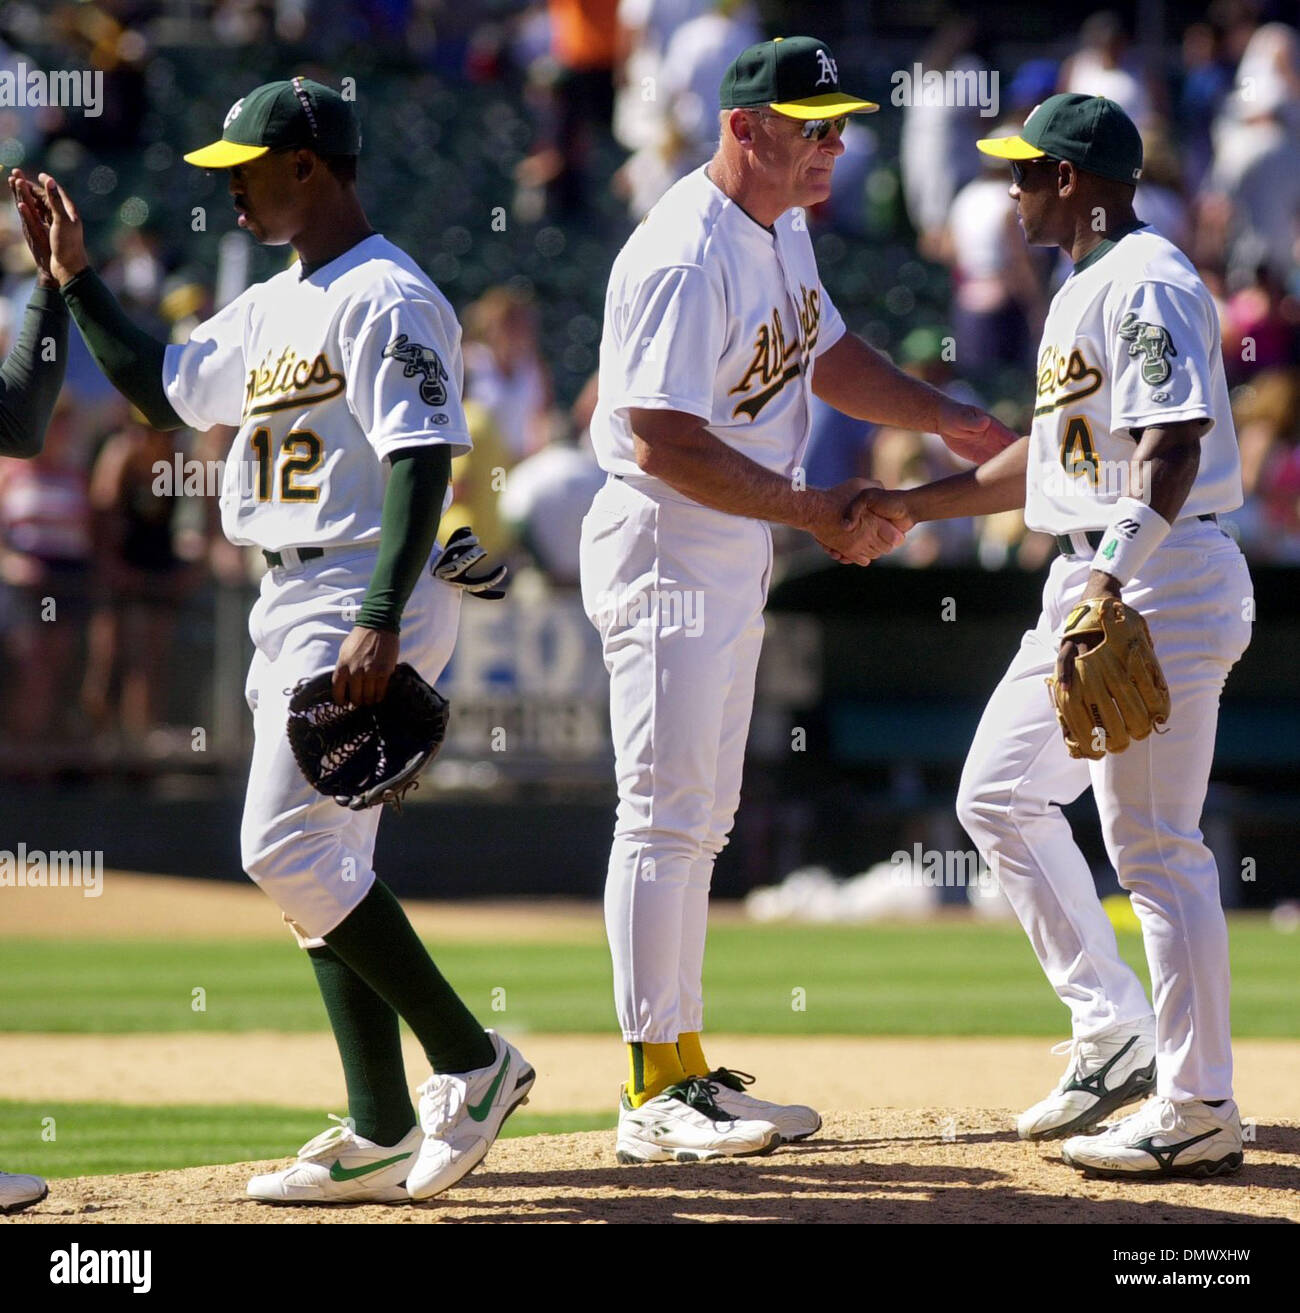 Oakland Athletics 2002 High Resolution Stock Photography and Images - Alamy